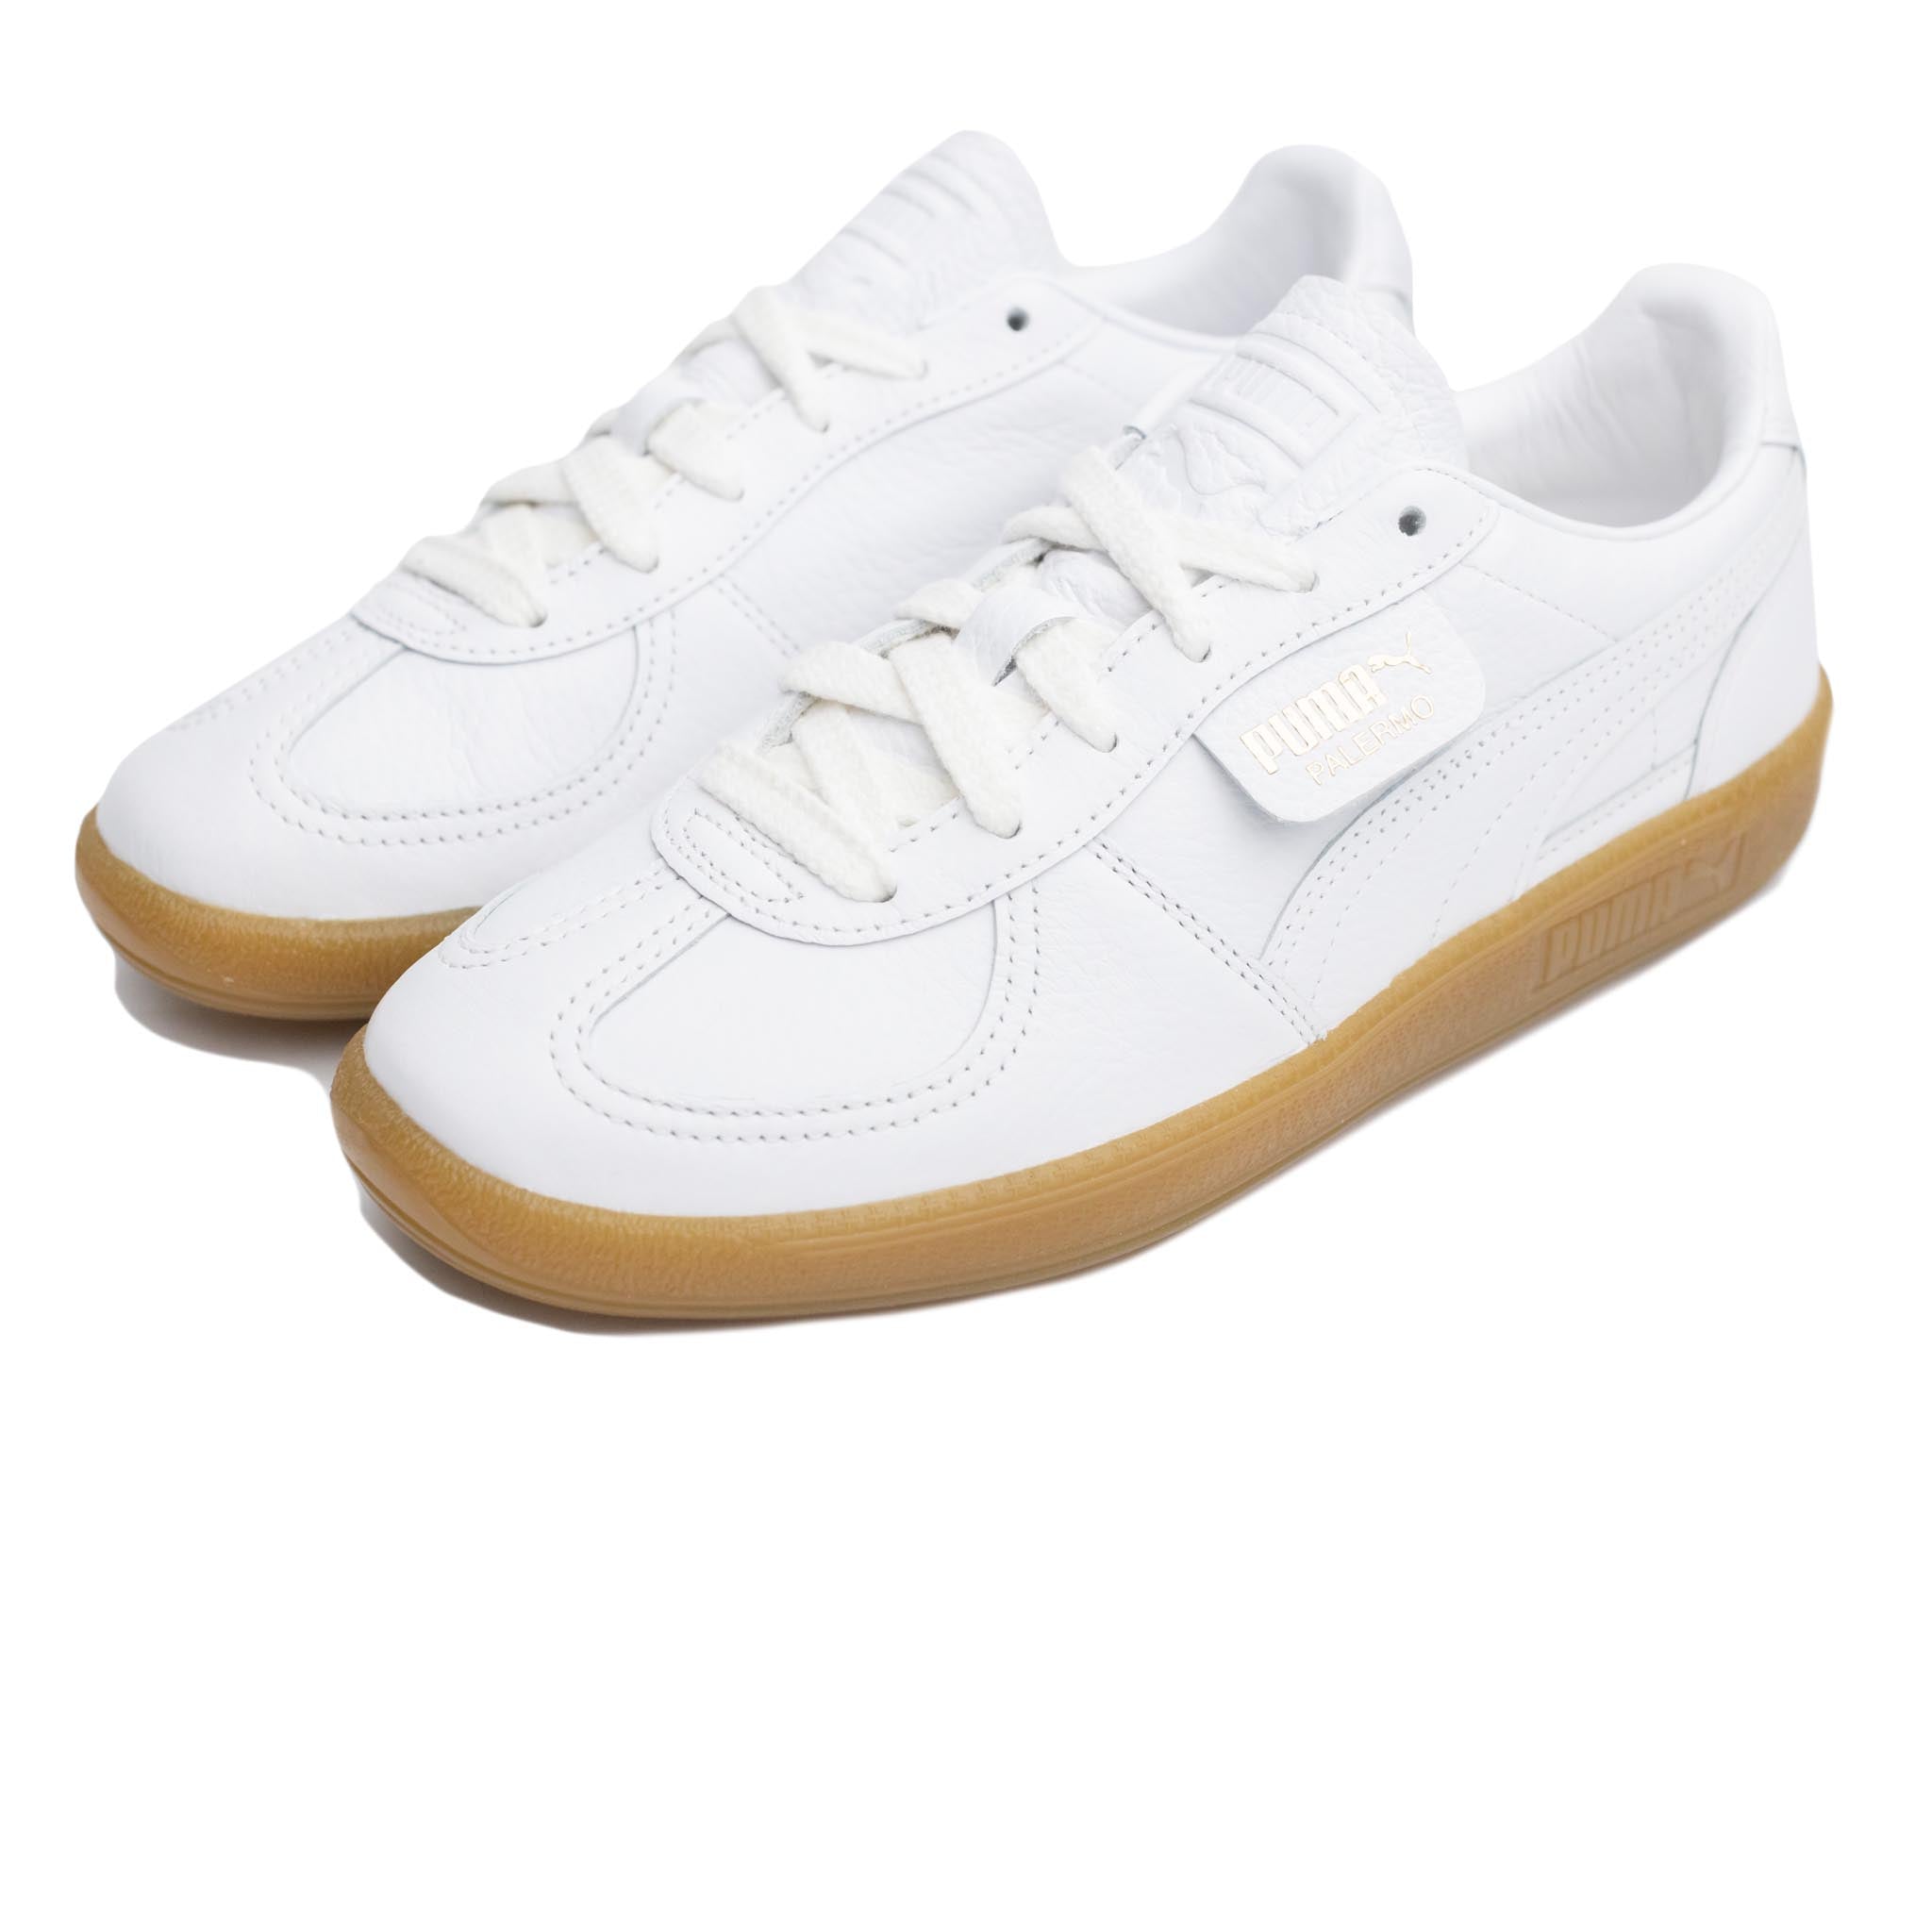 Puma Palermo Premium White/Frosted Ivory